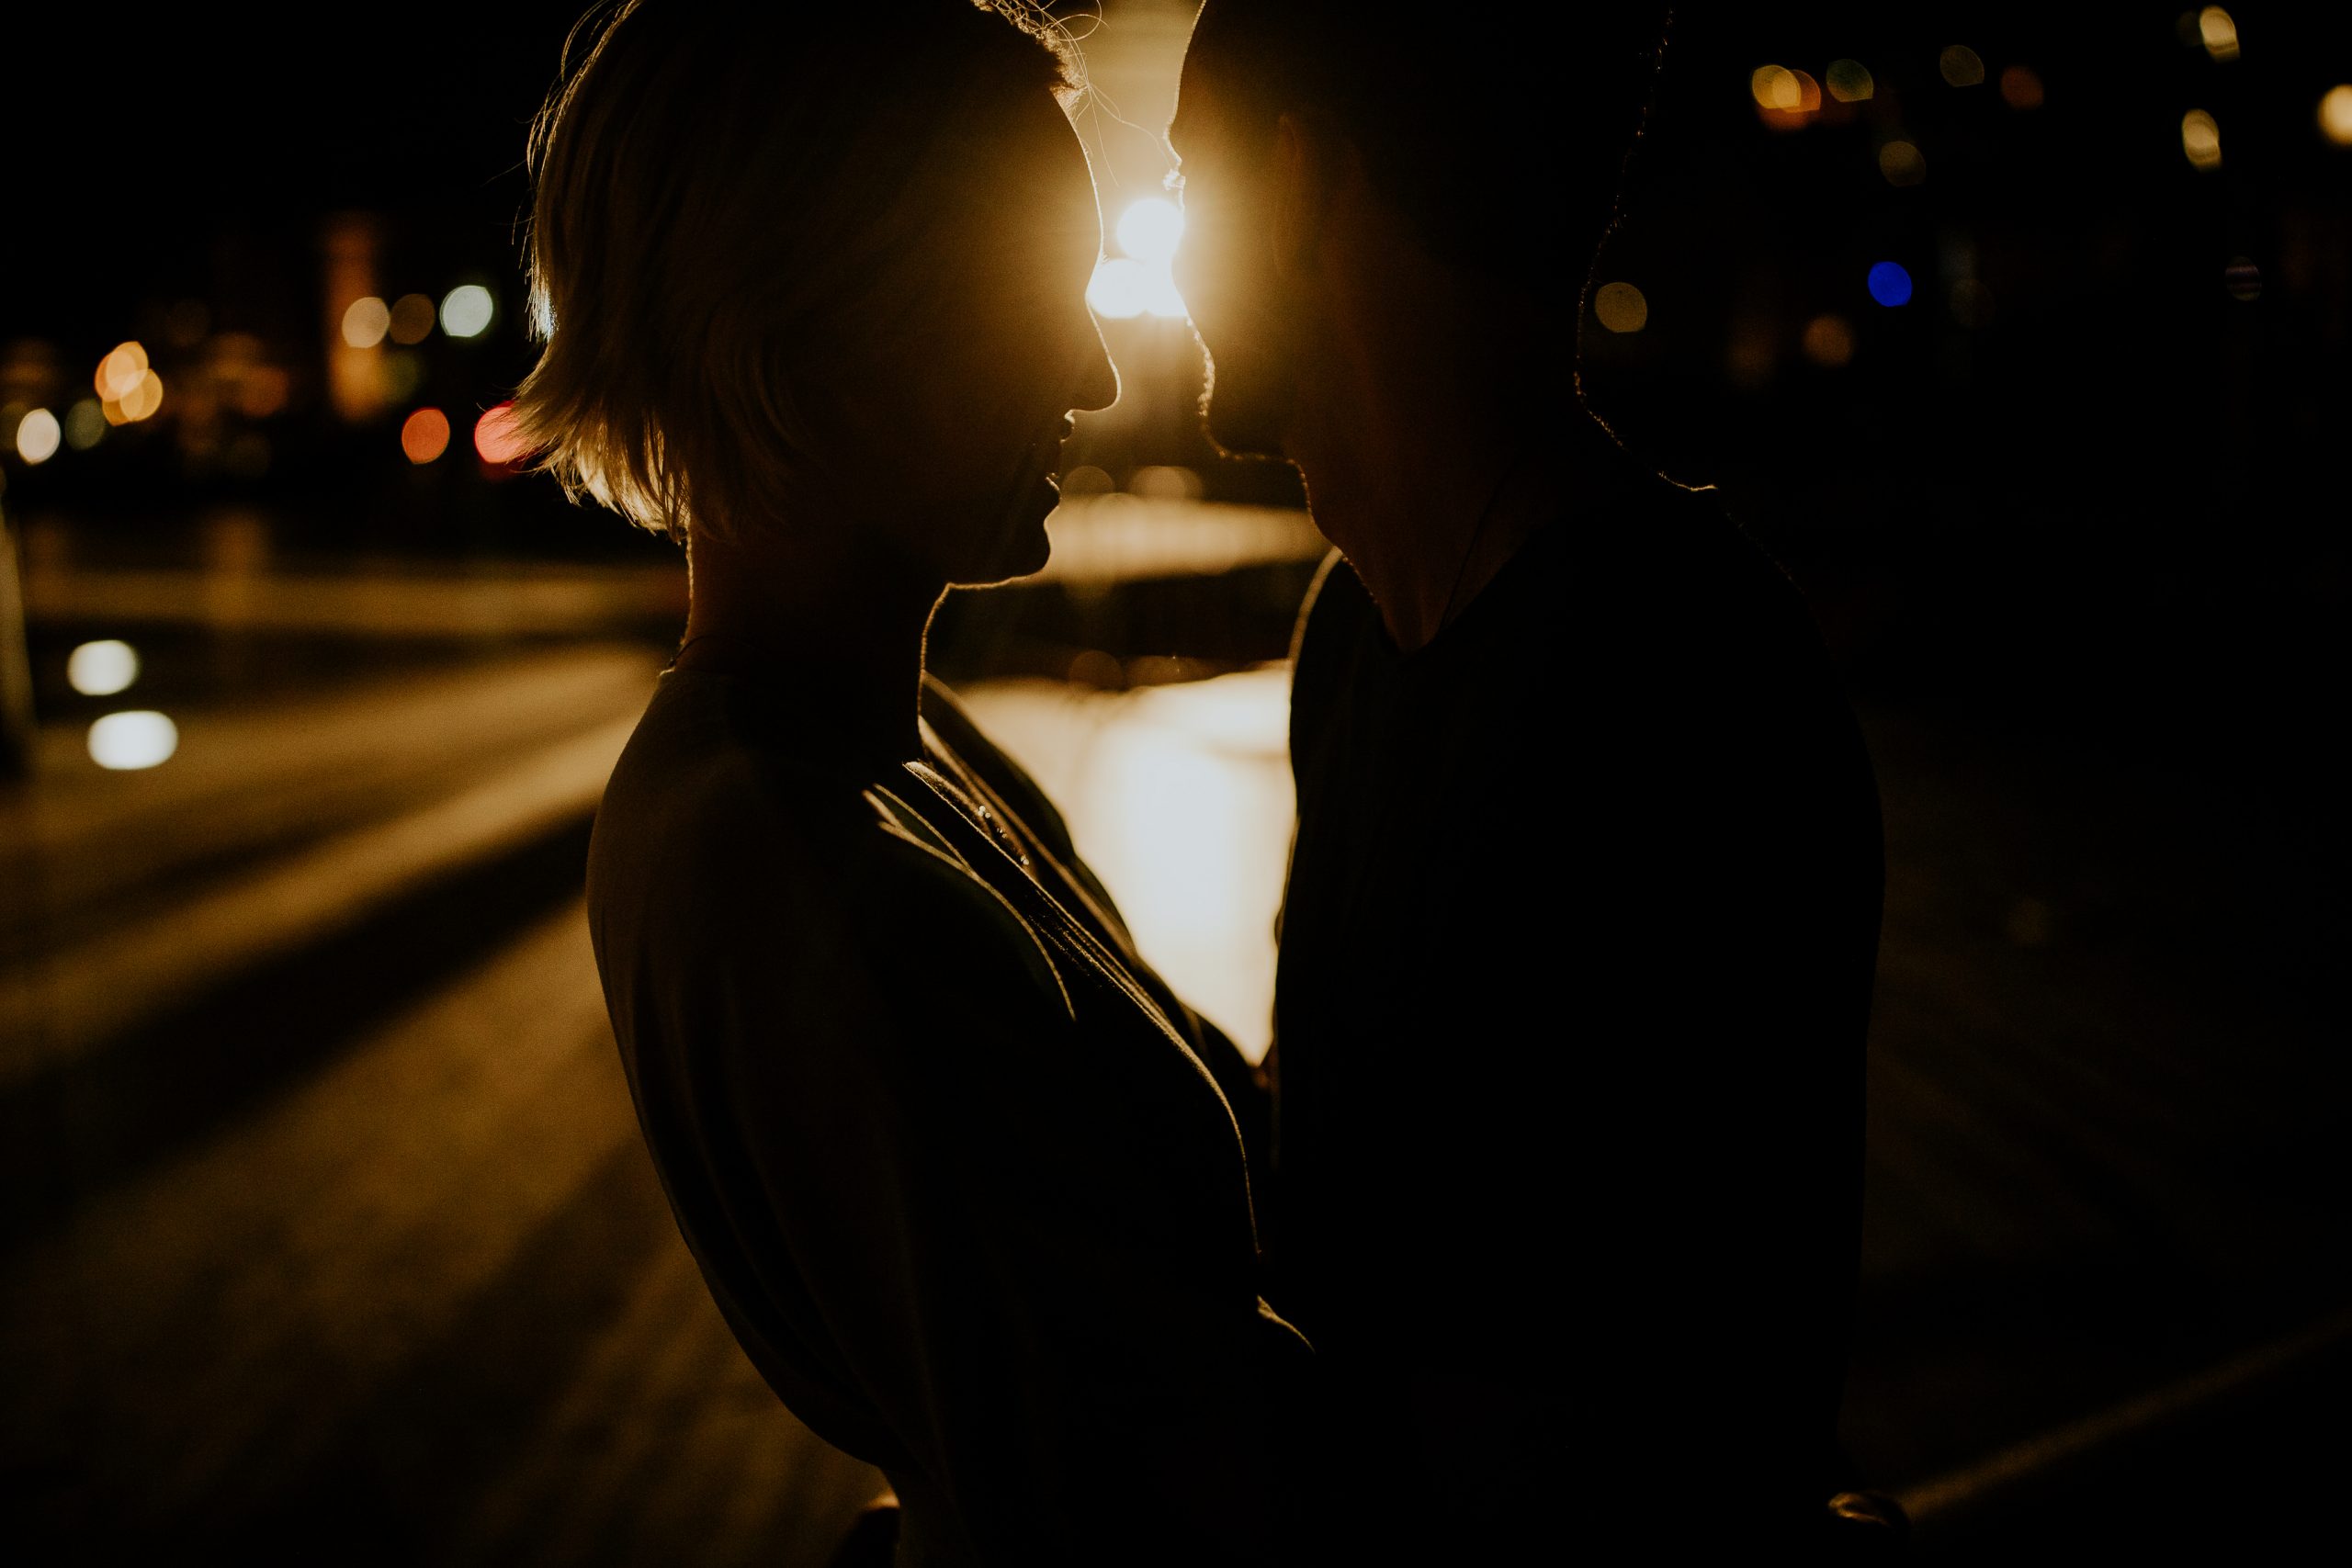 couple silhouette at night embracing and smiling